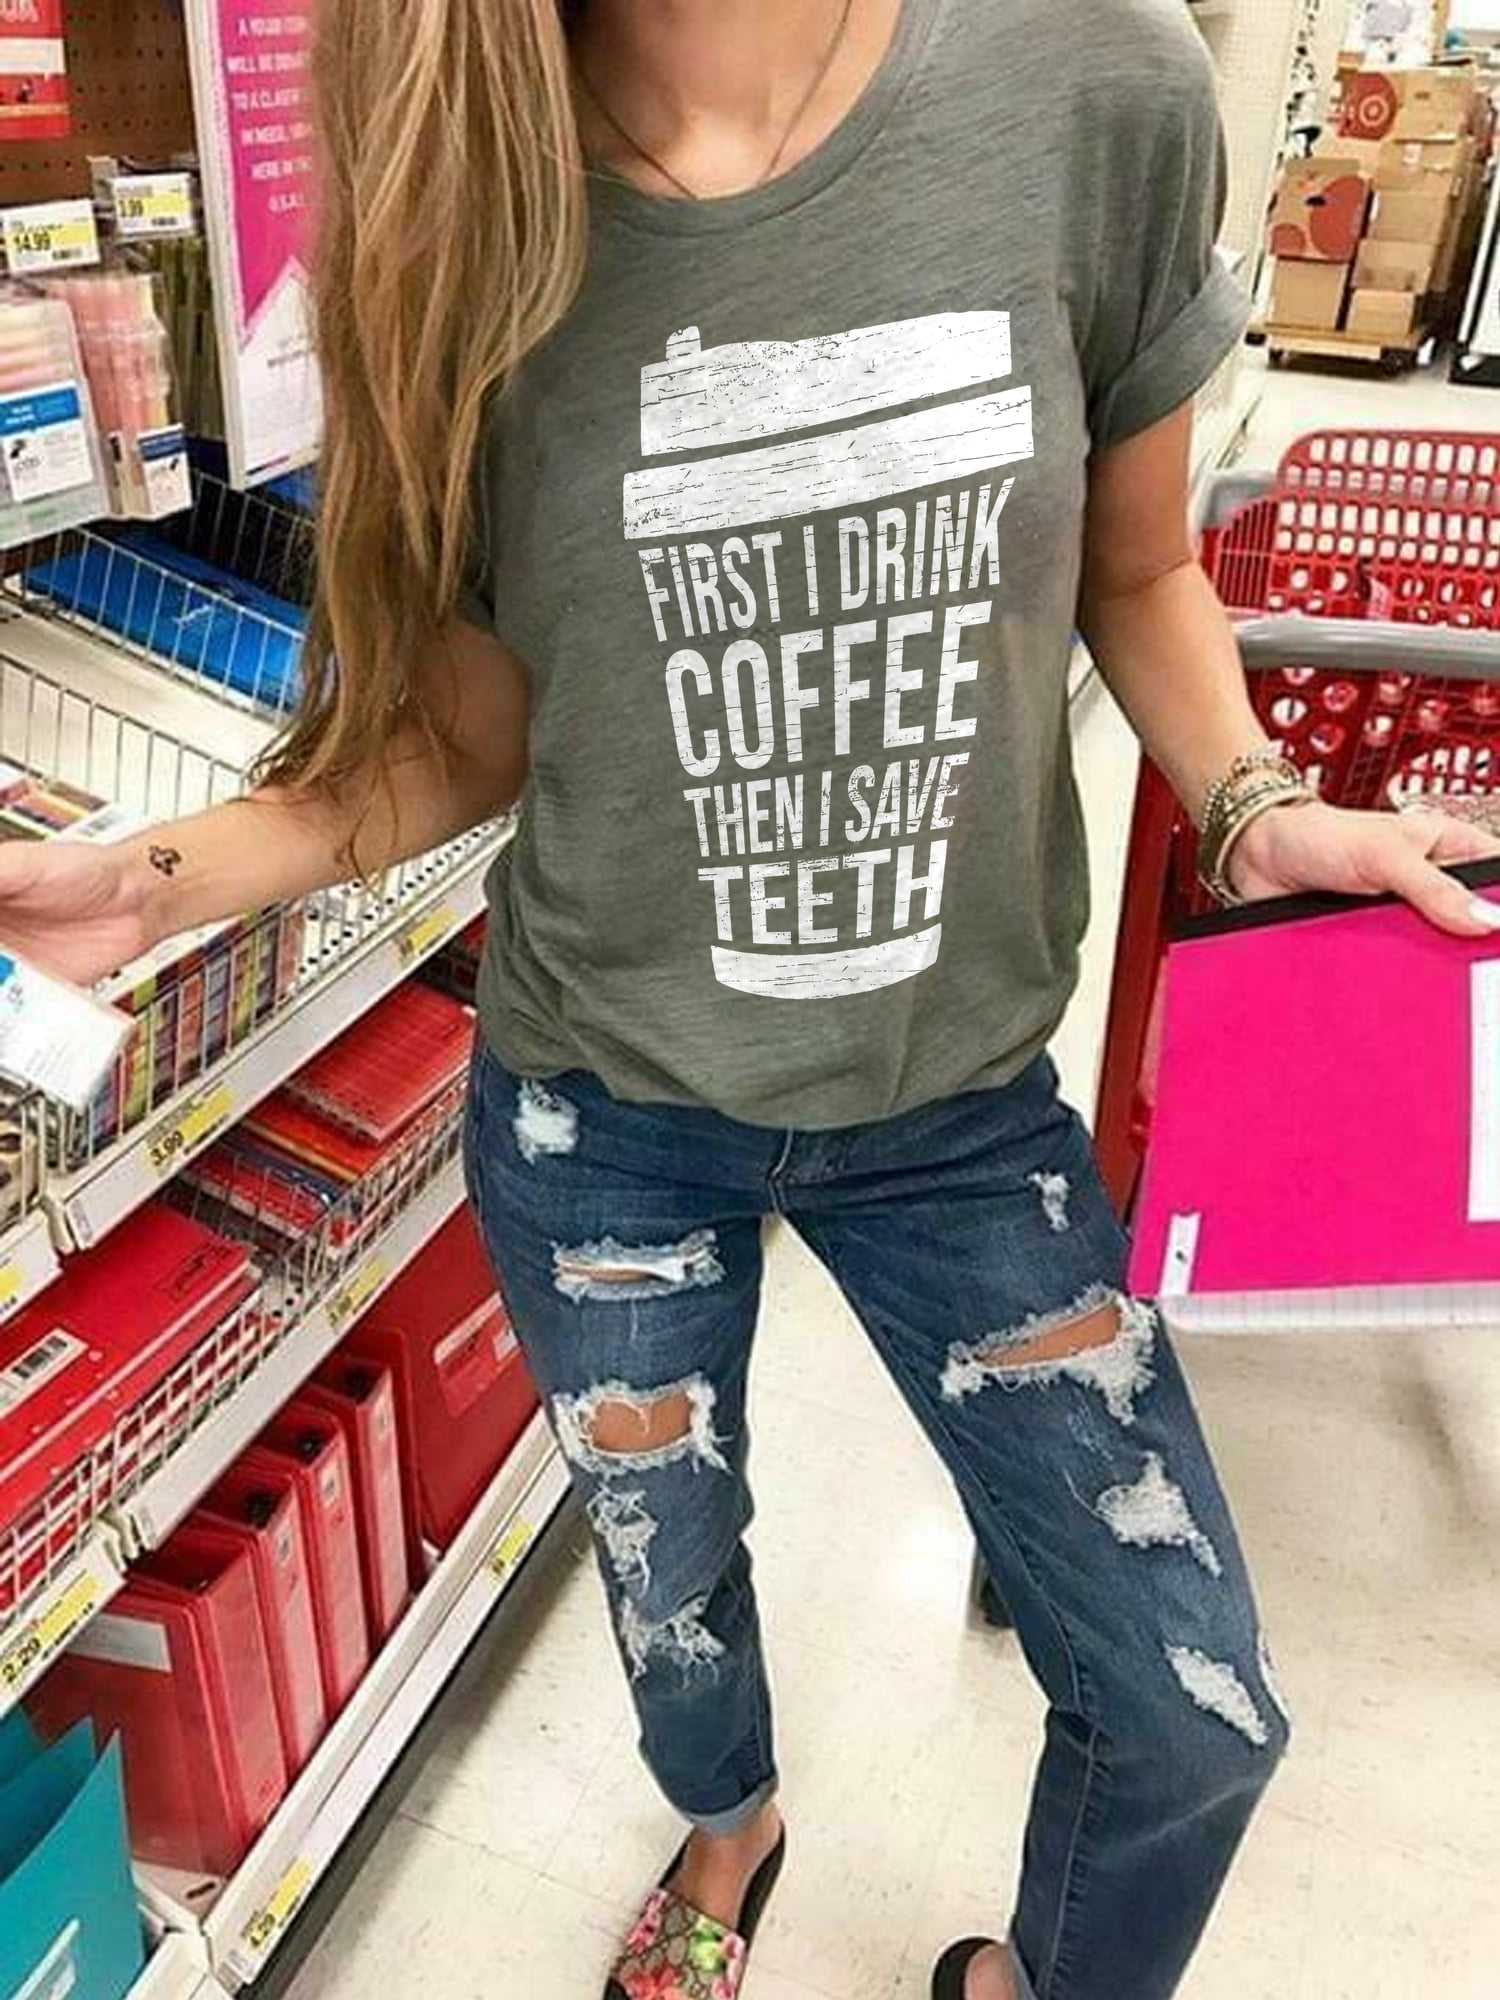 First I drink coffee then I save teeth